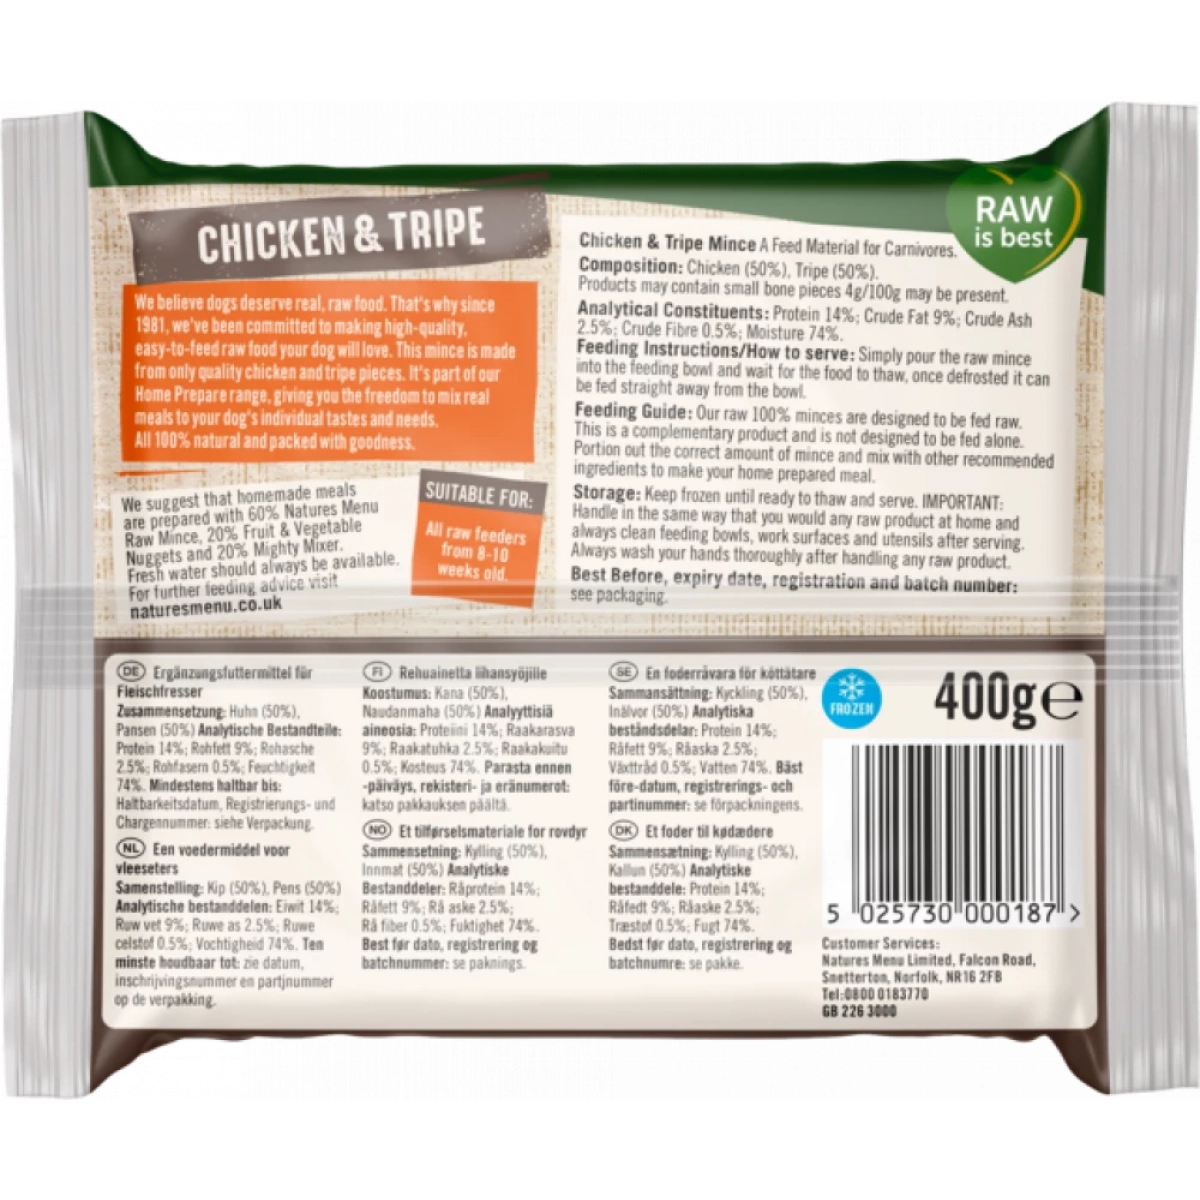 Natures Menu – Chicken and Tripe 400g – Pawfect Supplies Ltd Product Image